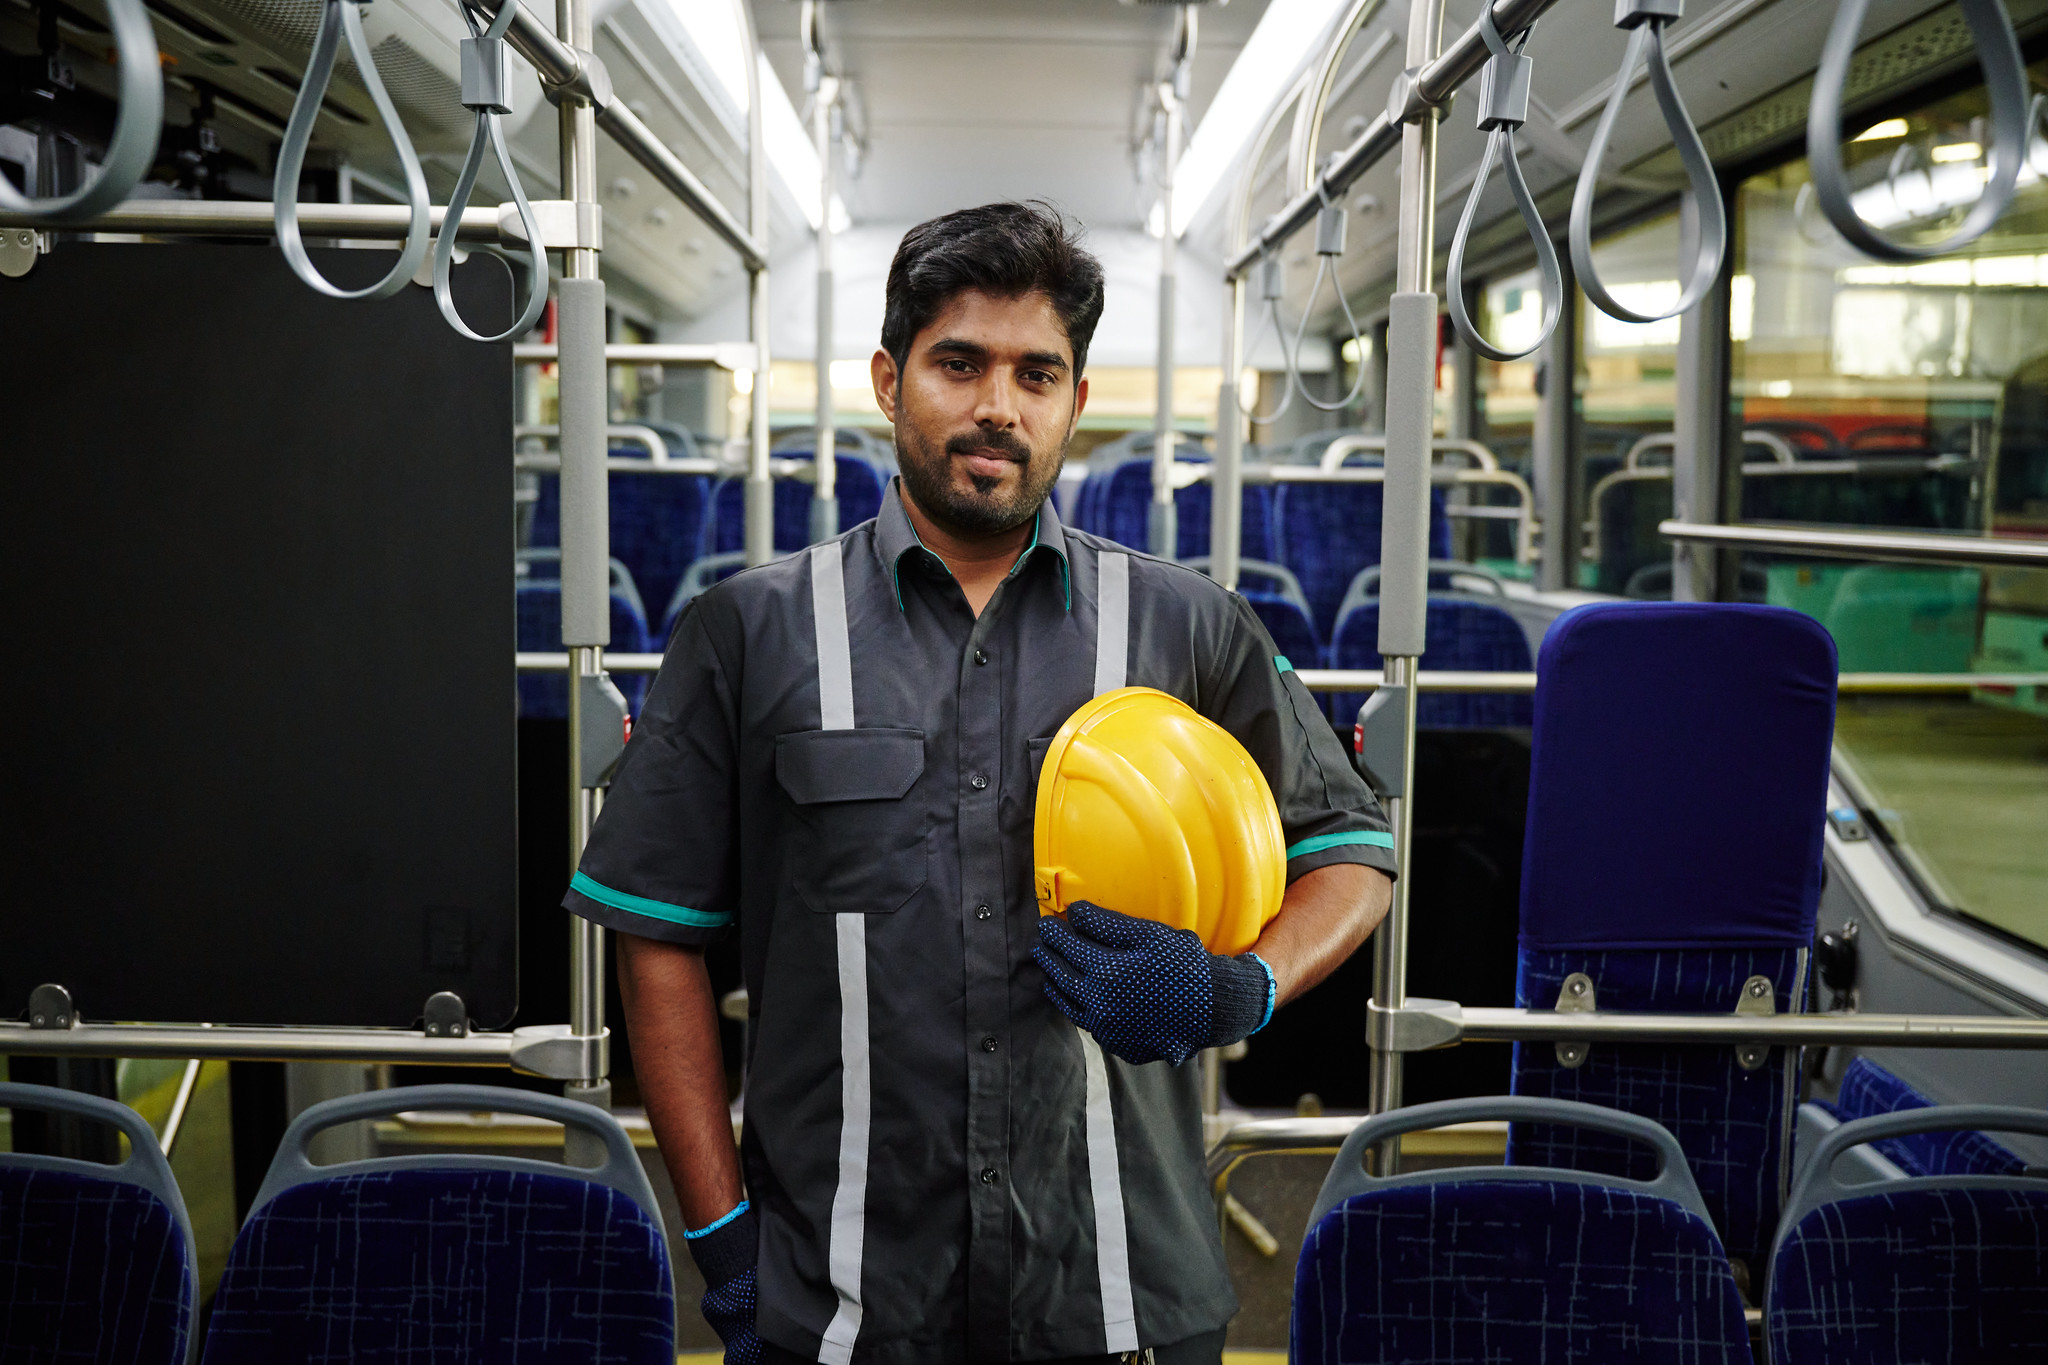 Young  Indian man with standing in an empty train holding yellow hard hat in left hand 